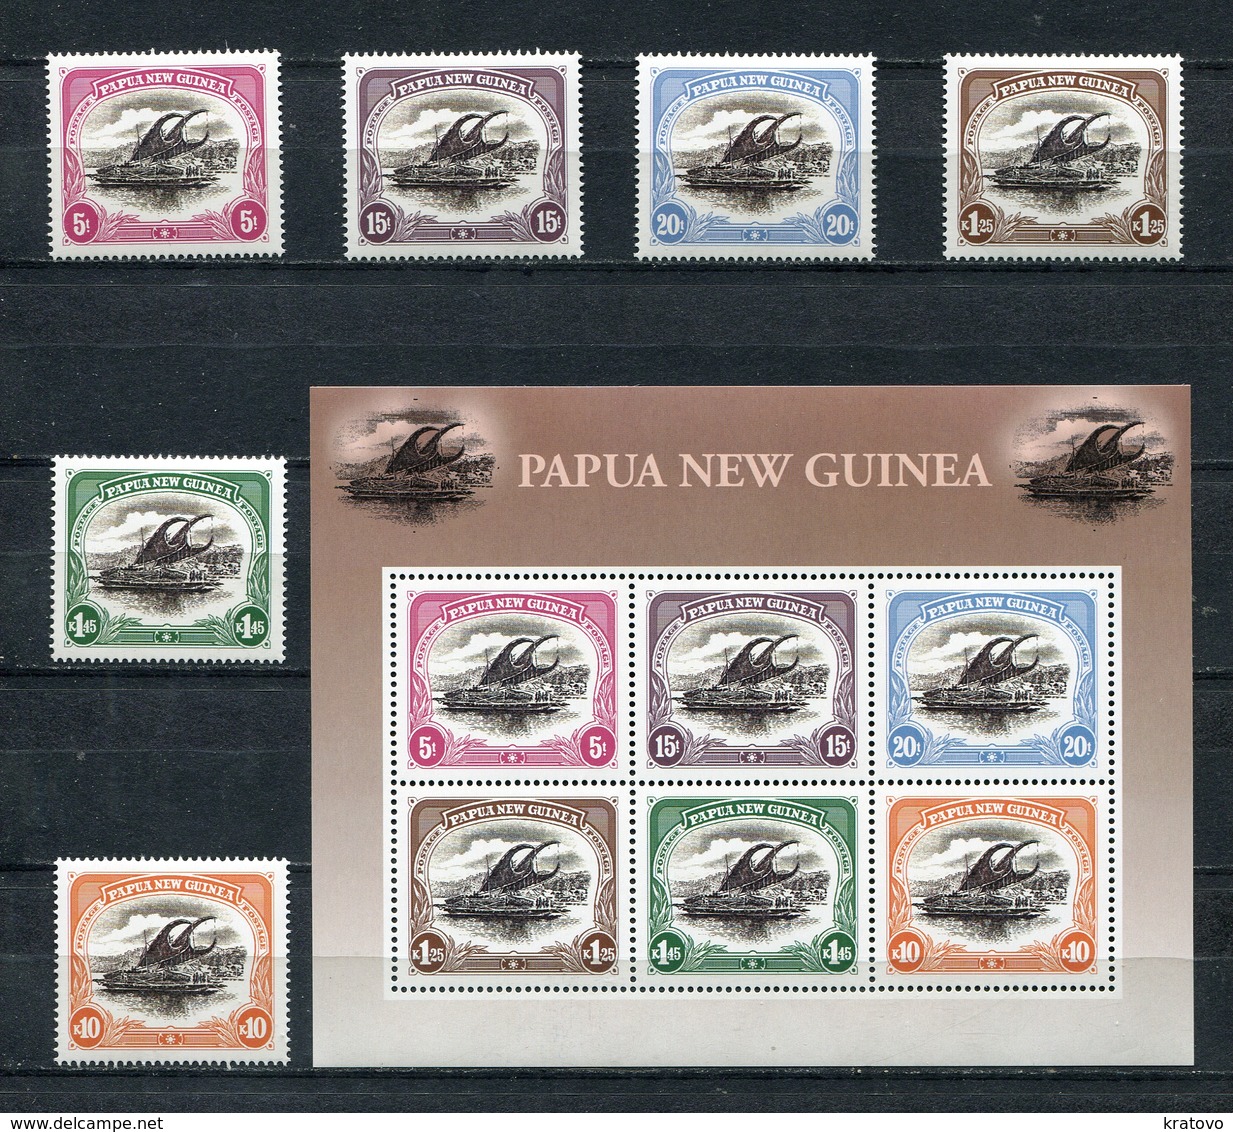 PAPUA NEW GUINEA 2002 Mi # 925 - 930 + Bl 21 100 Years Of The First Stamp MNH - Papua New Guinea